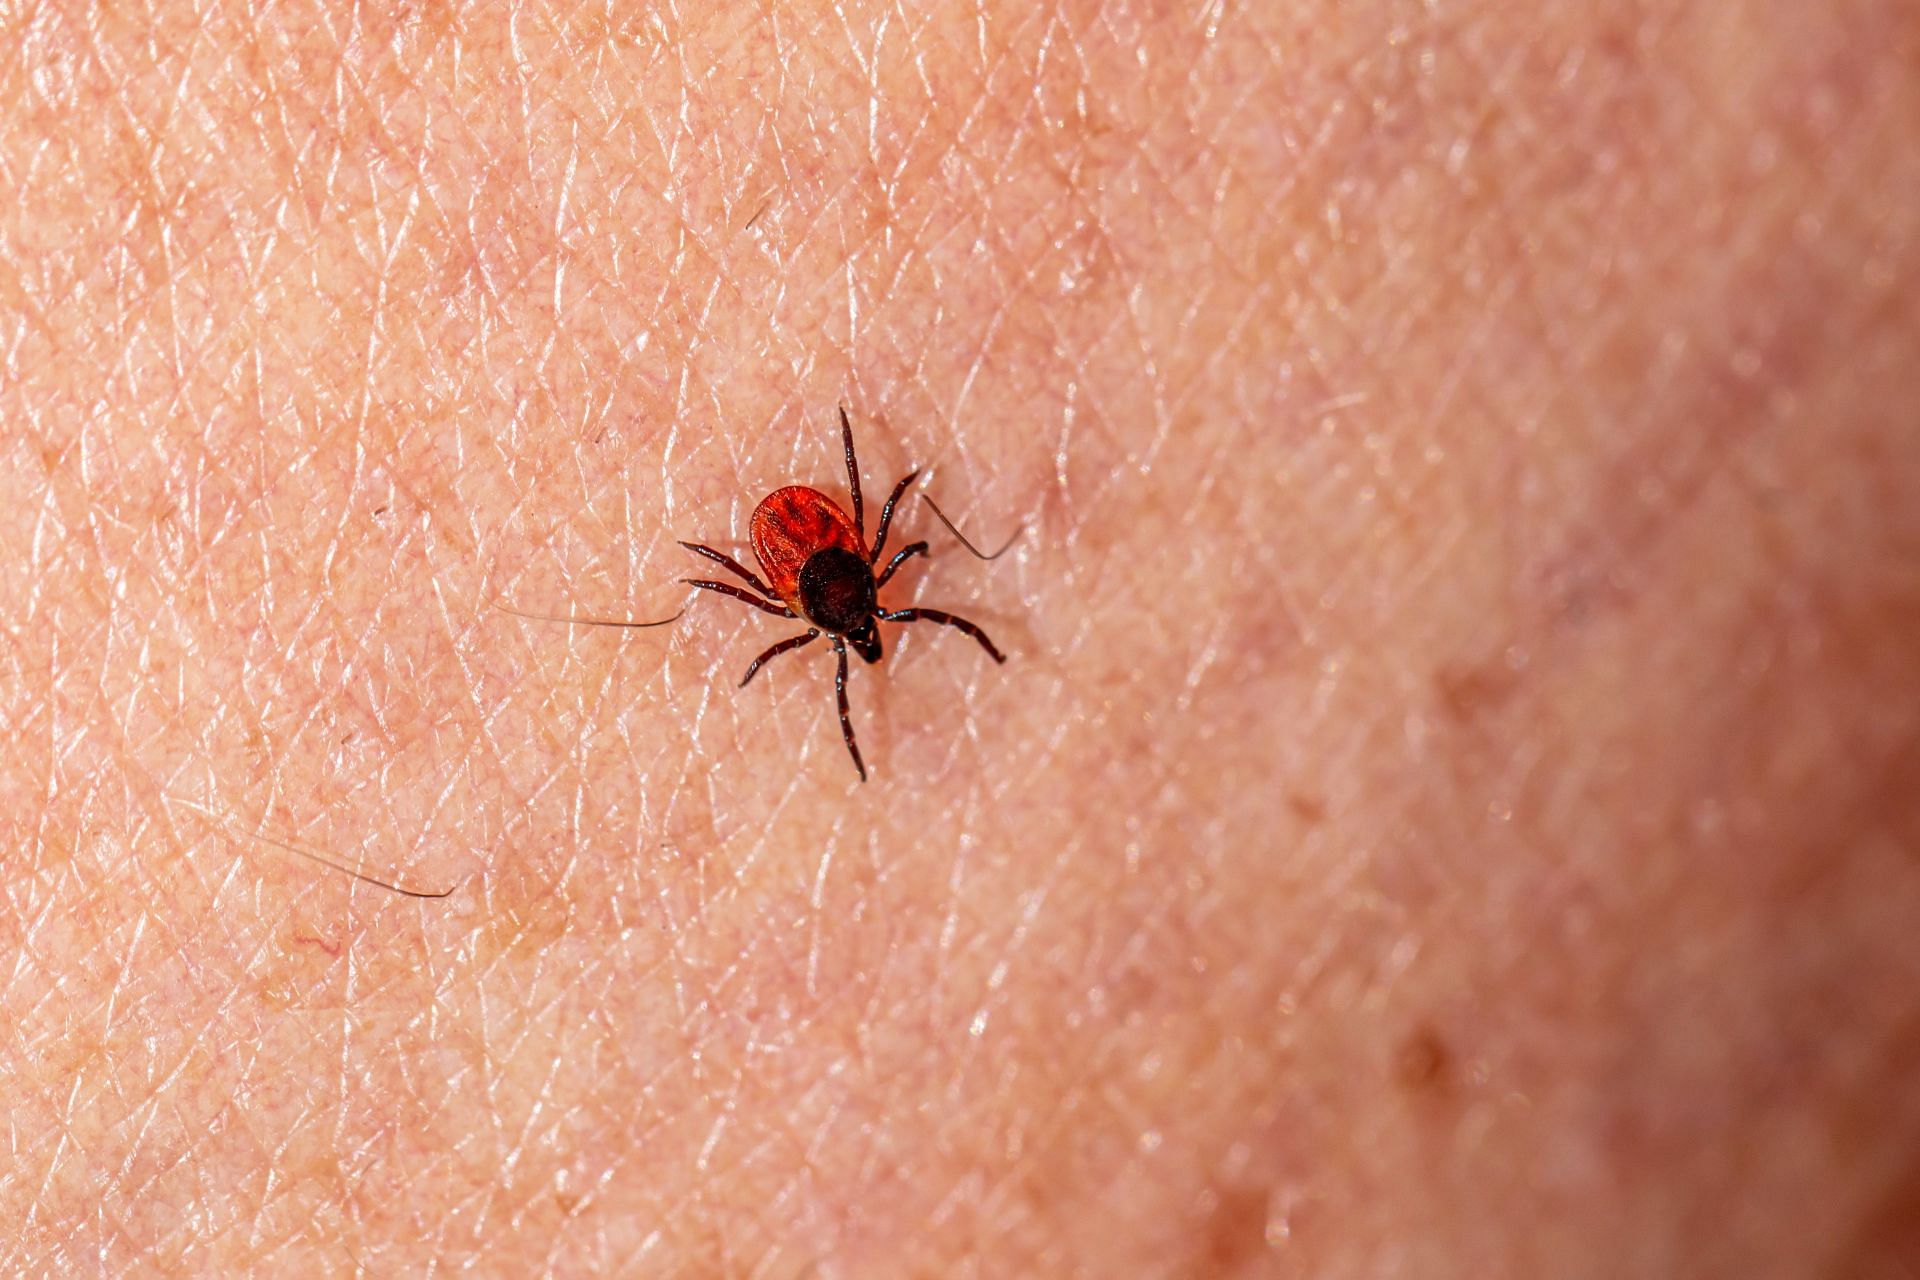 Brown Recluse Bite Treatment: What You Should Do?